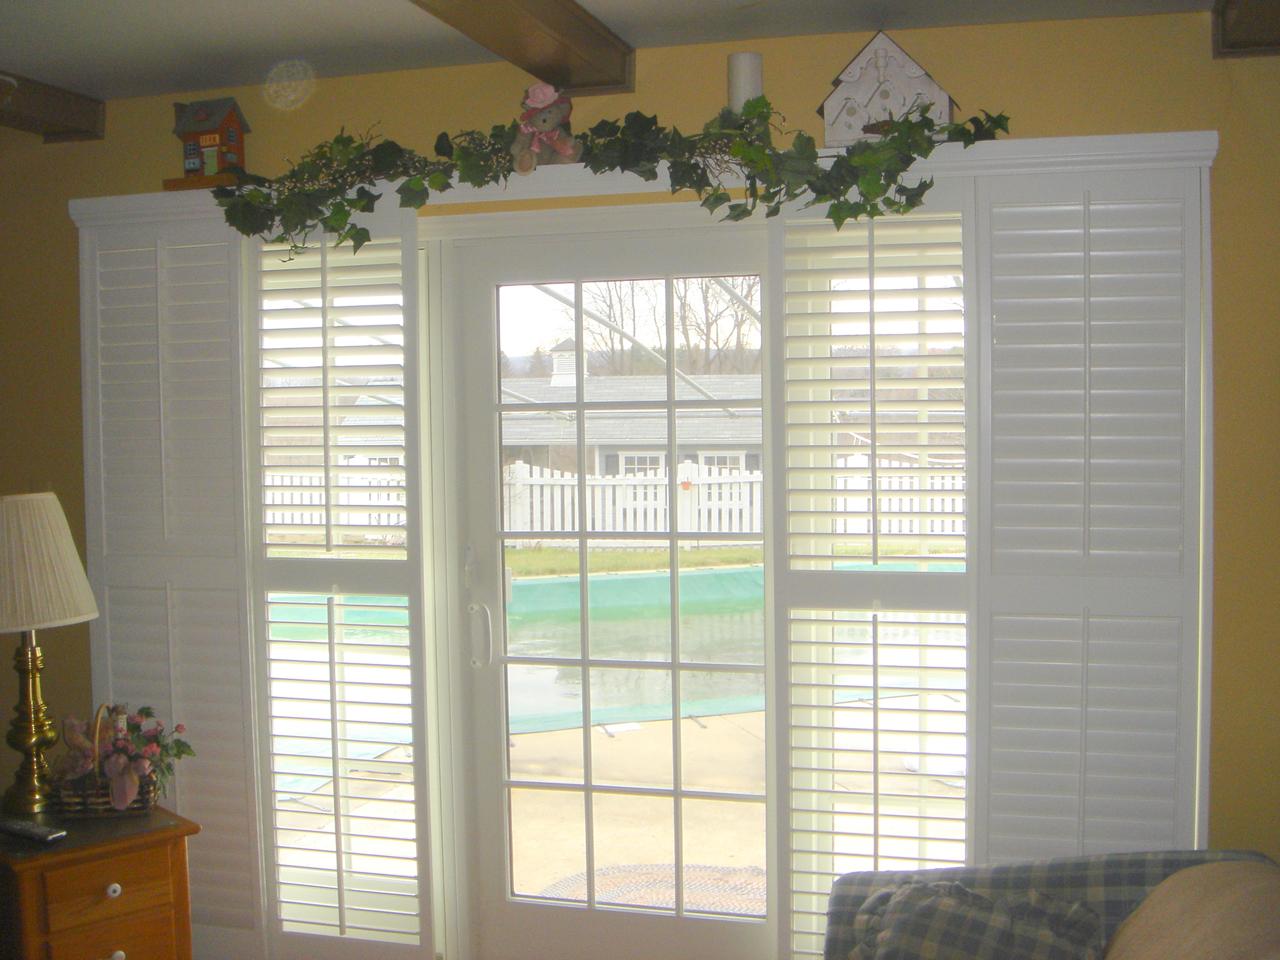 Bypass plantation shutters on French door